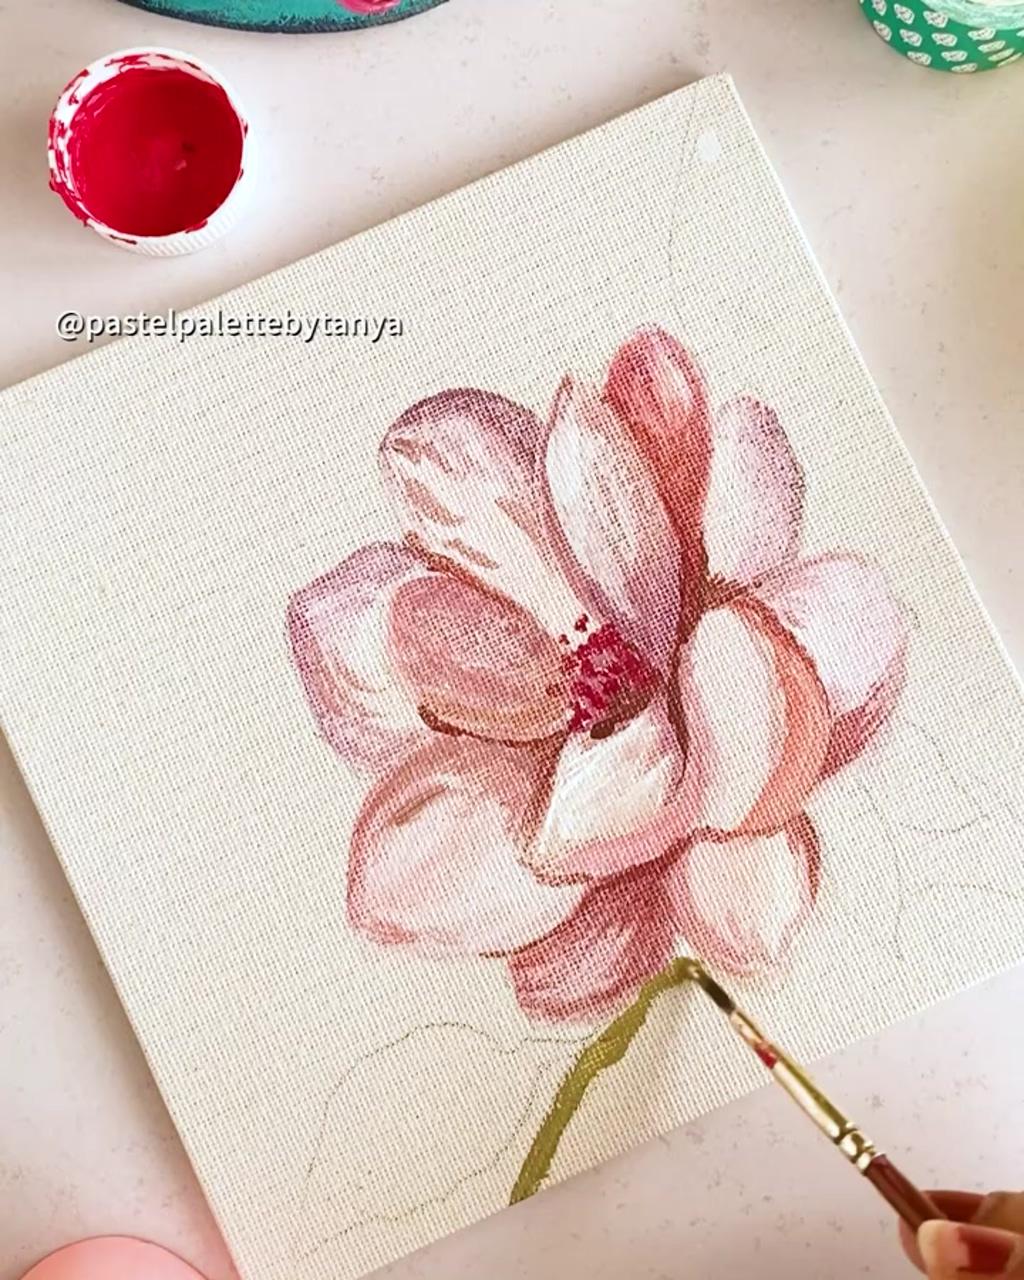 Painting a magnolia; painting flowers tutorial